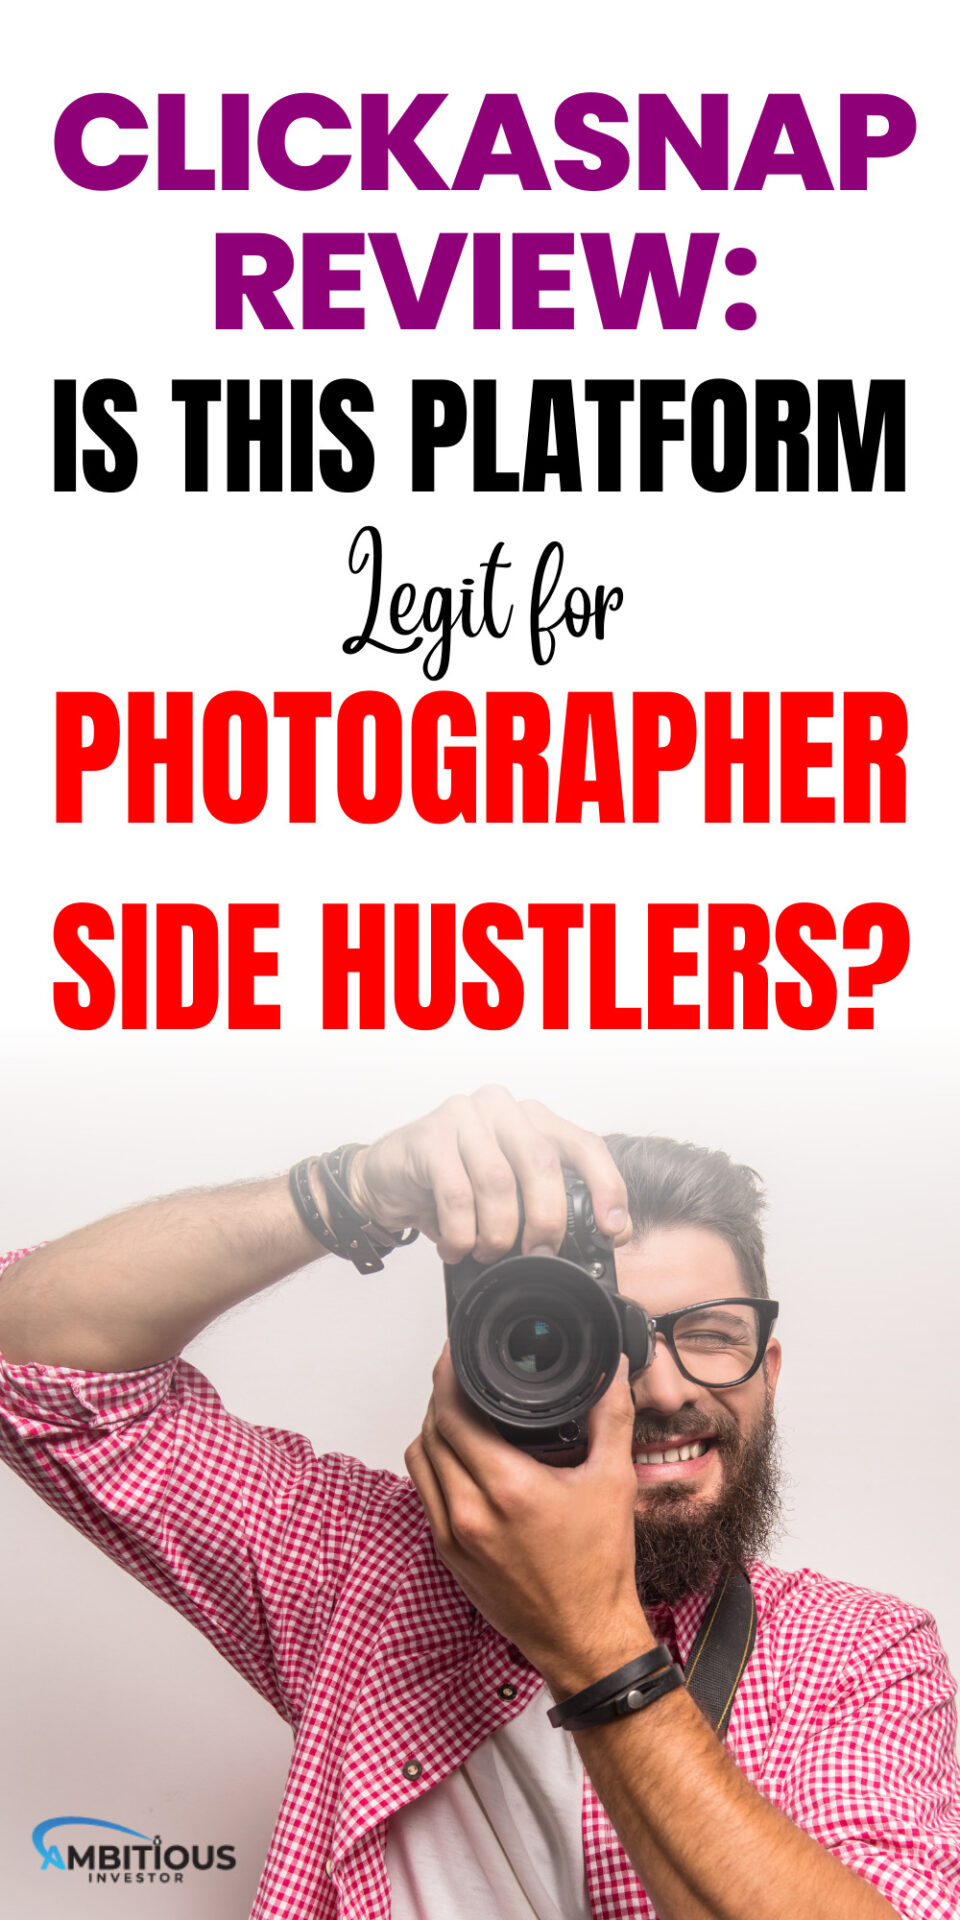 ClickASnap Review: Is this Platform Legit for Photographer Side Hustlers?